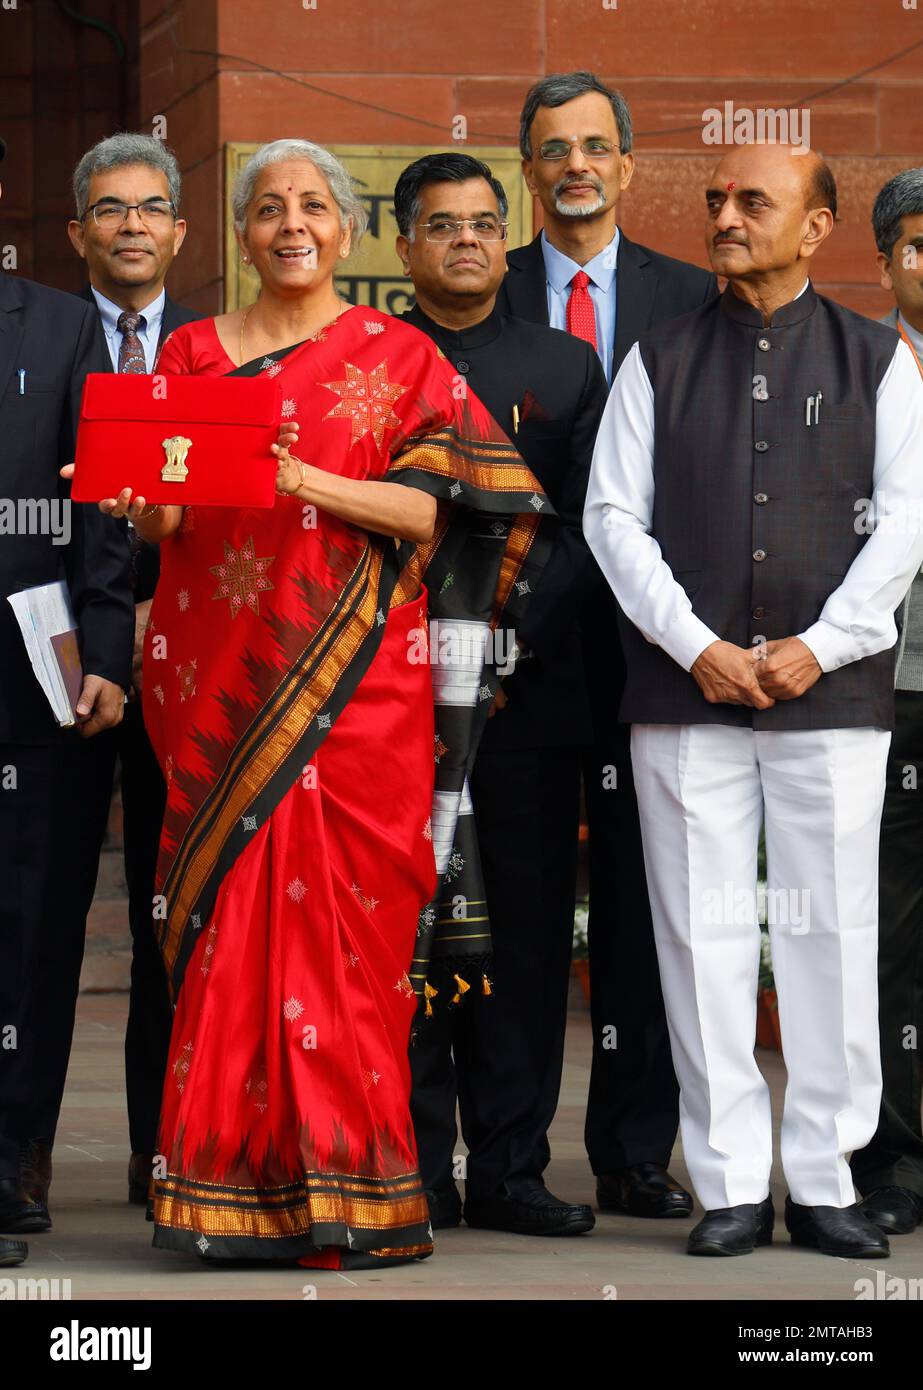 New Delhi, India. 01st Feb, 2023. Union Minister for Finance, Nirmala Sitharaman, Left, Union Minister of Sate Bhagwat Kishanrao Karad, Right, with other officials pose for photographs before she leaves her office (Finance Ministry), for the President's House before present the annual Budget for the year 2023-24 in the Parliament in New Delhi. Nirmala Sitharaman will be presenting her fifth union Budget. (Photo by Naveen Sharma/SOPA Images/Sipa USA) Credit: Sipa USA/Alamy Live News Stock Photo